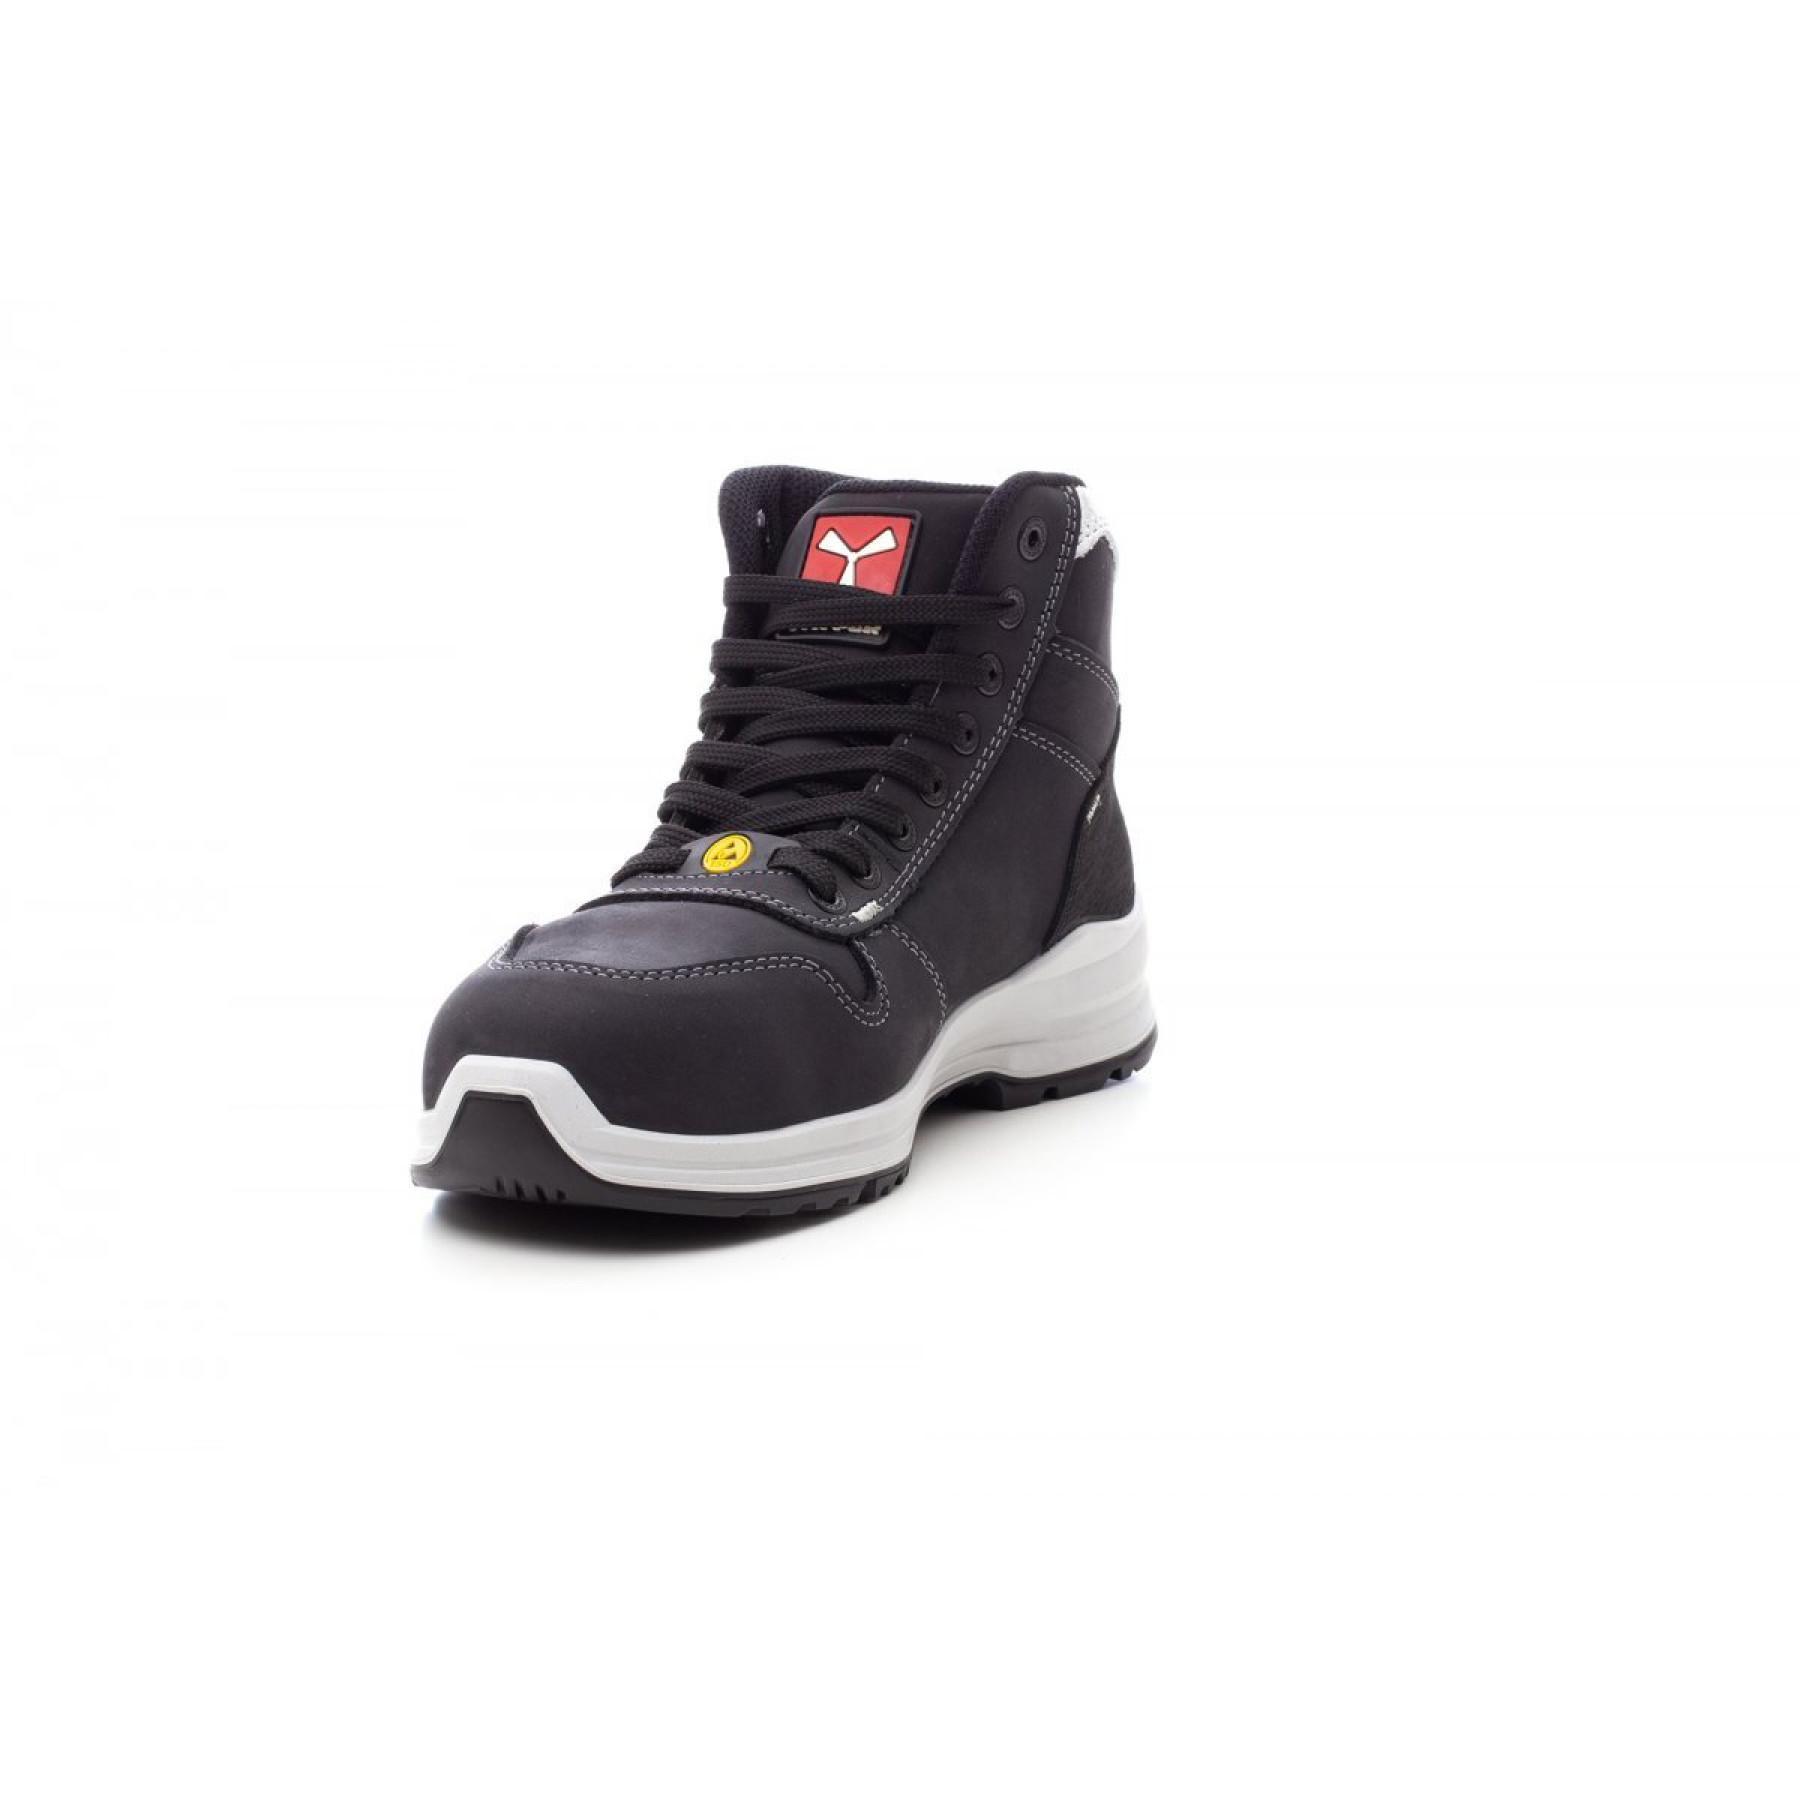 Payper Get Force Mid Ld Safety Shoes